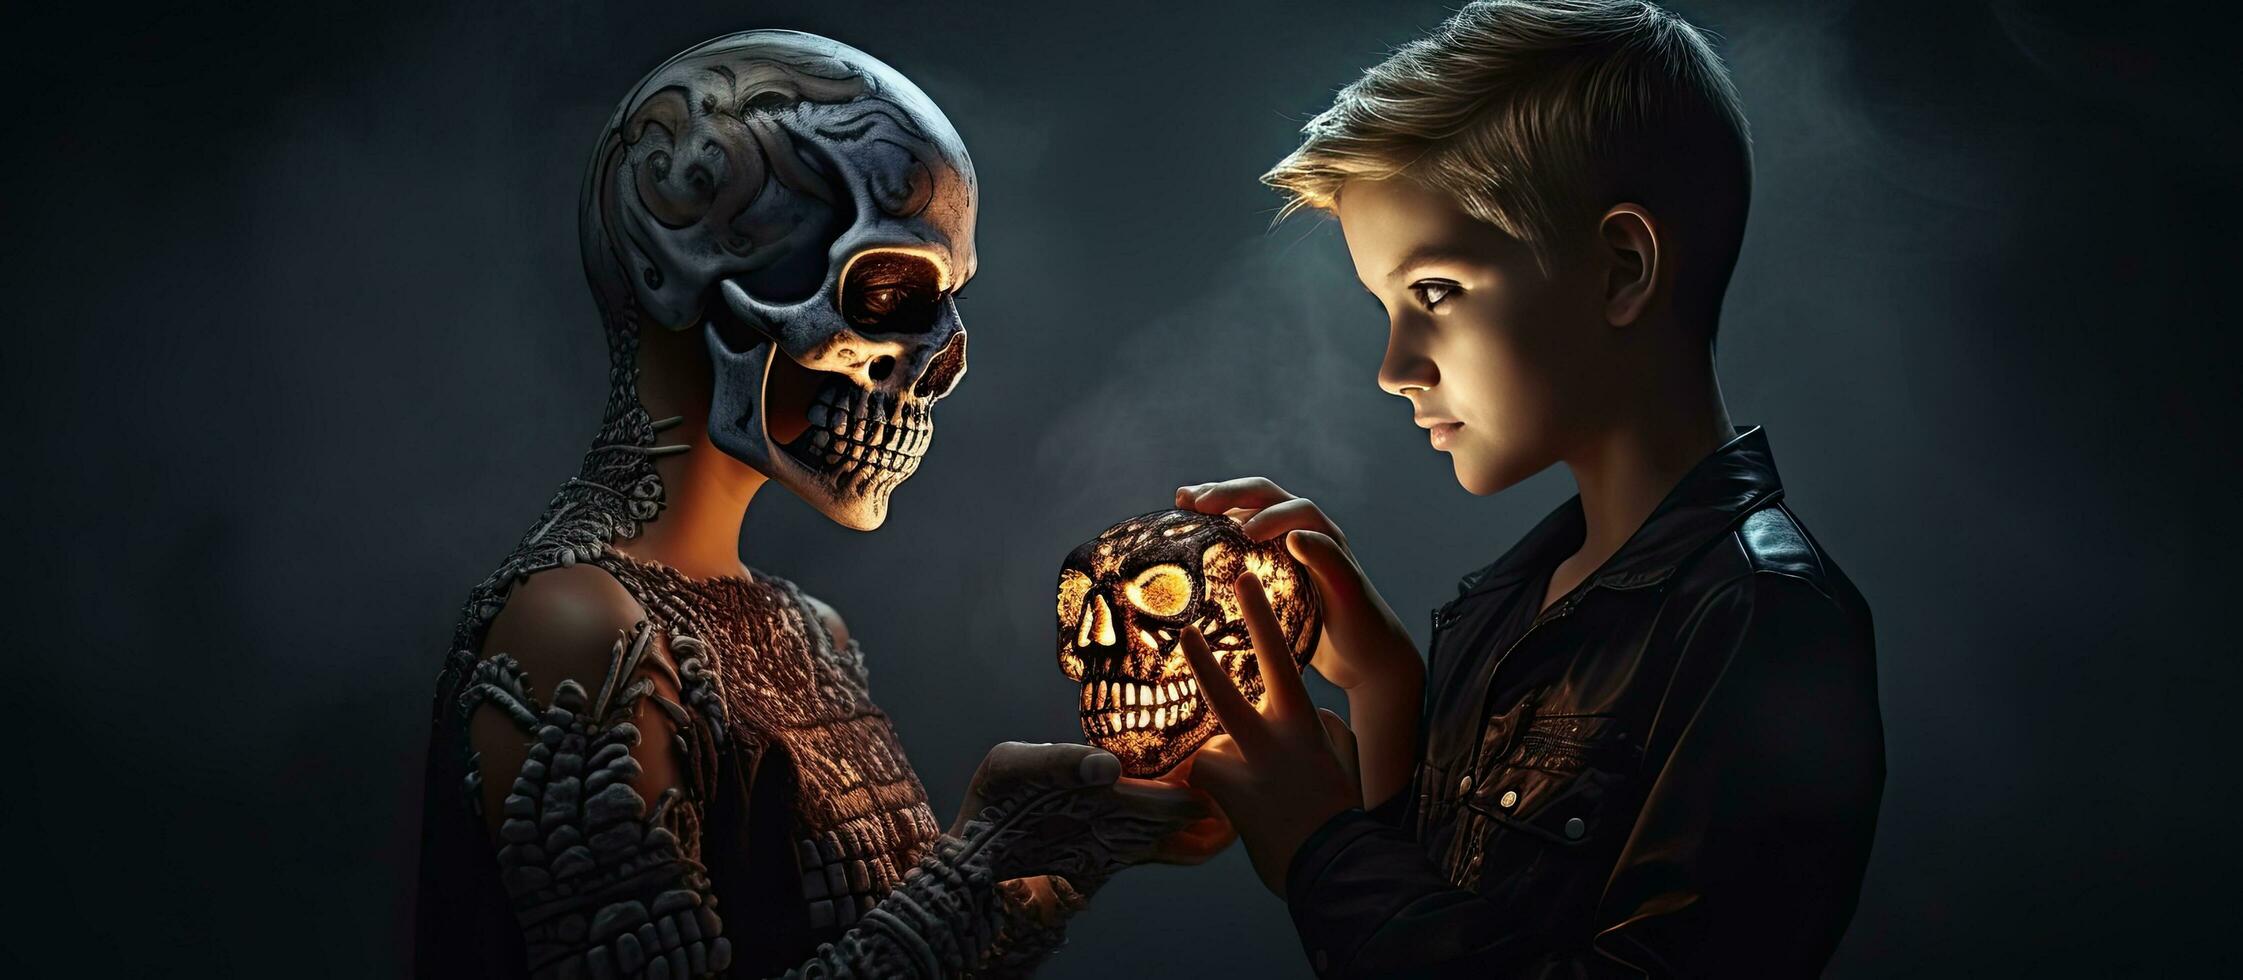 Costumes makeup and hairstyles are seen in a studio portrait of a young witch and a teenage boy holding a sign and skeleton for a Halloween celebration Th photo